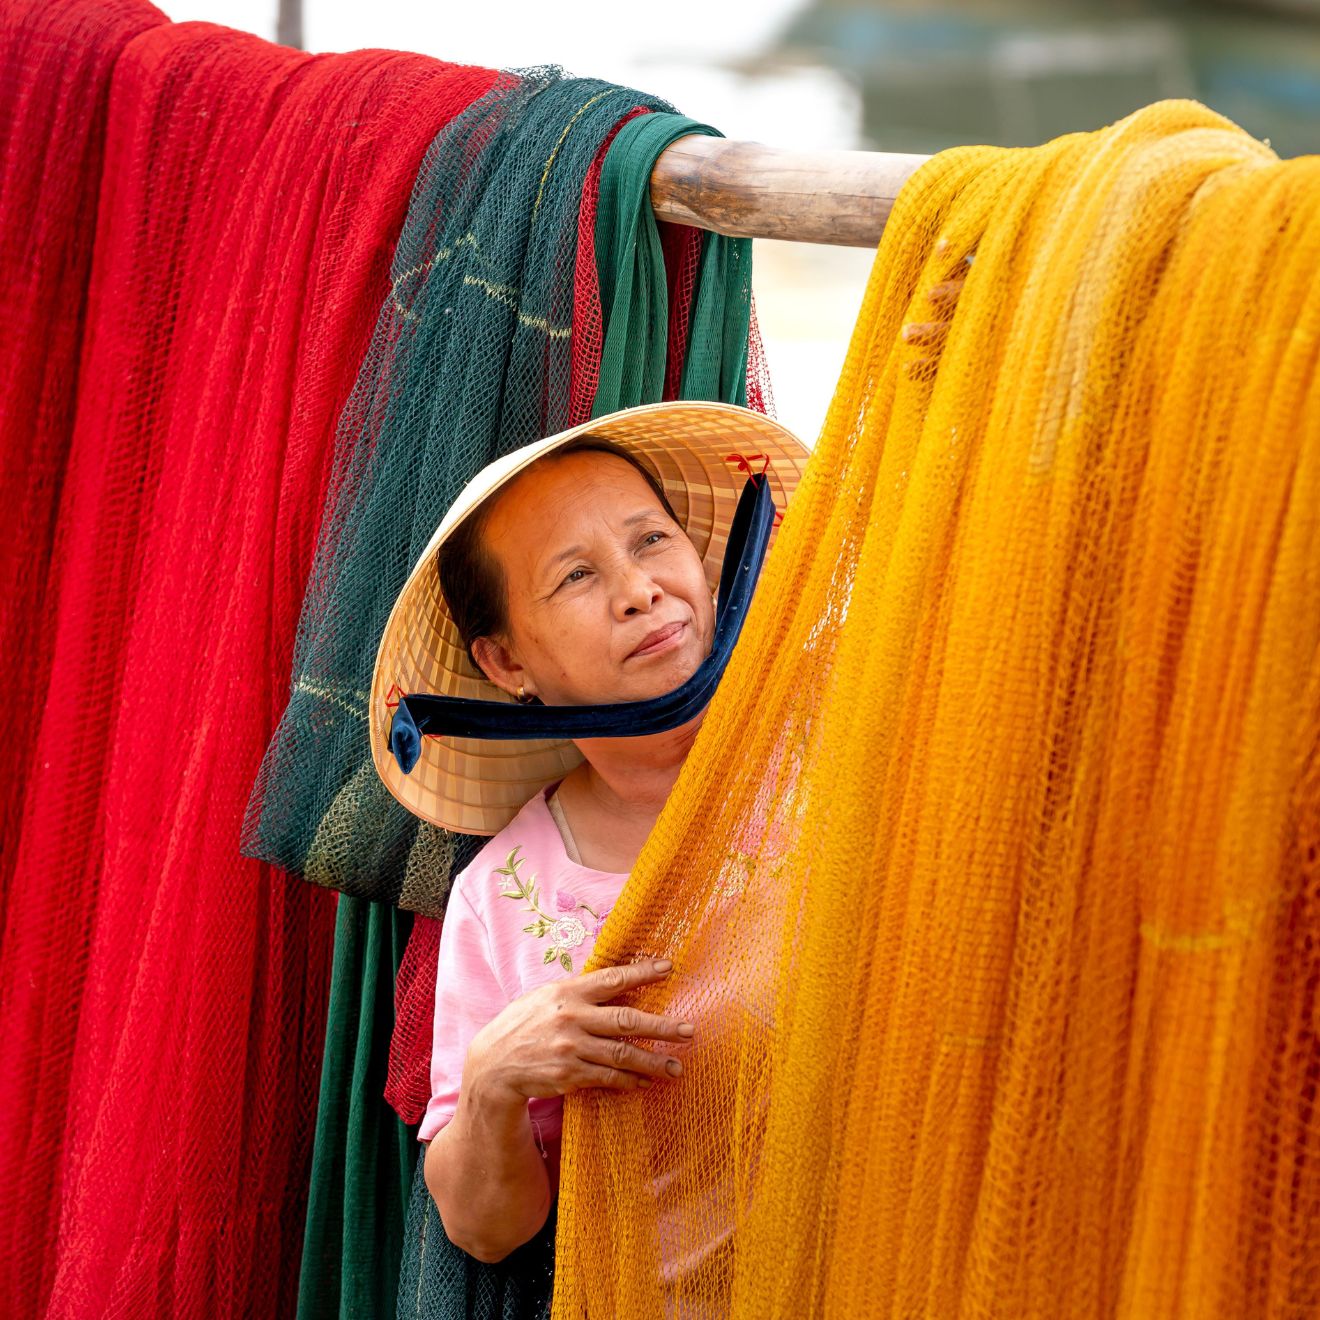 Thua Thien Hue Province, Vietnam - May 1, 2022: A woman in a fishing village exposing colorful nets after fishing trips to the sea - Image ID: 2JBKT6R (RF)